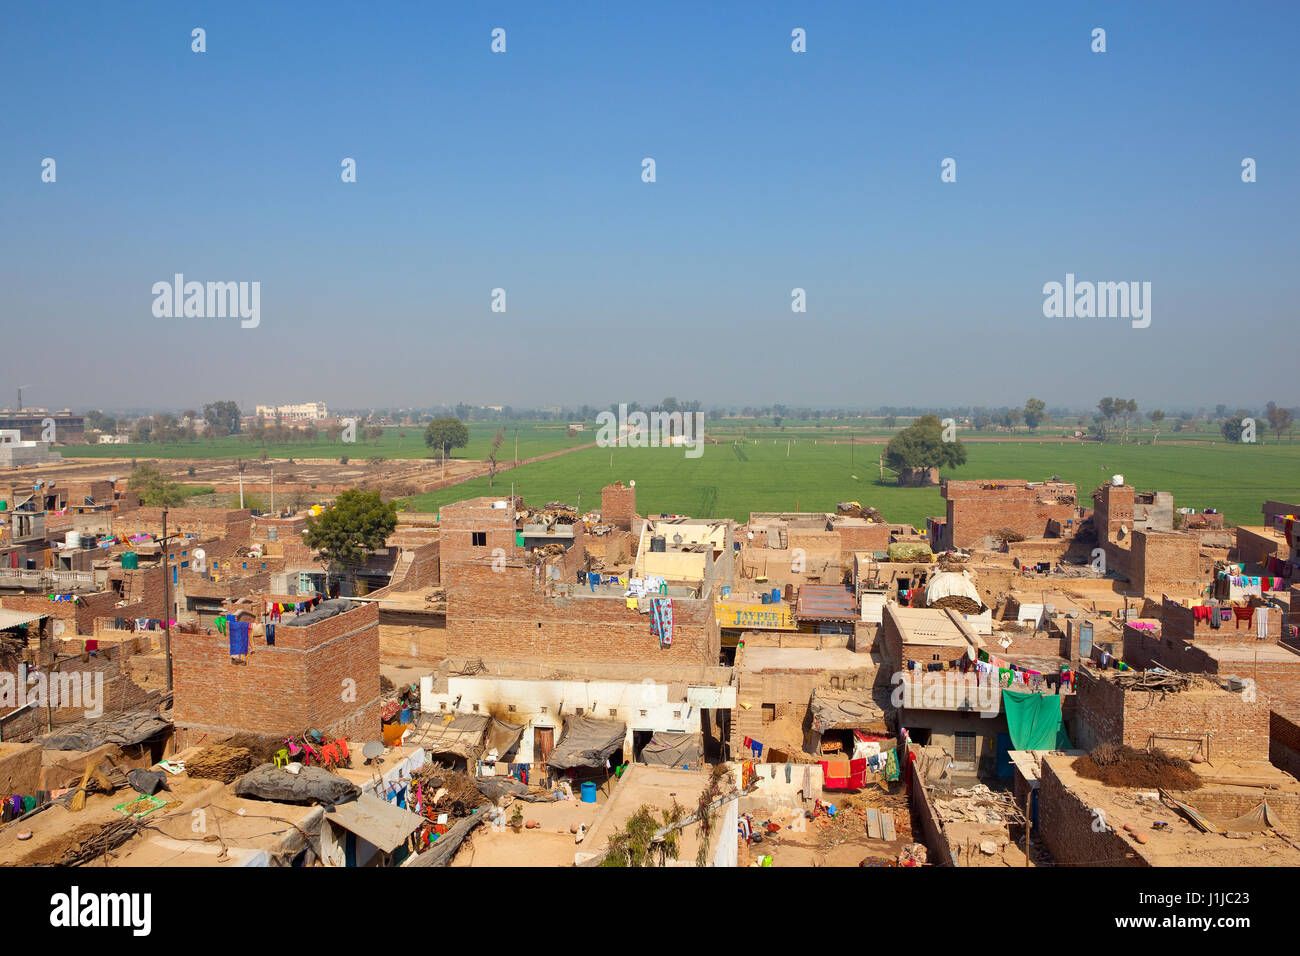 daily life in hanumangarh town viewed from bhatner fort in rajasthan india with the agricultural countryside in the distance under a blue sky Stock Photo